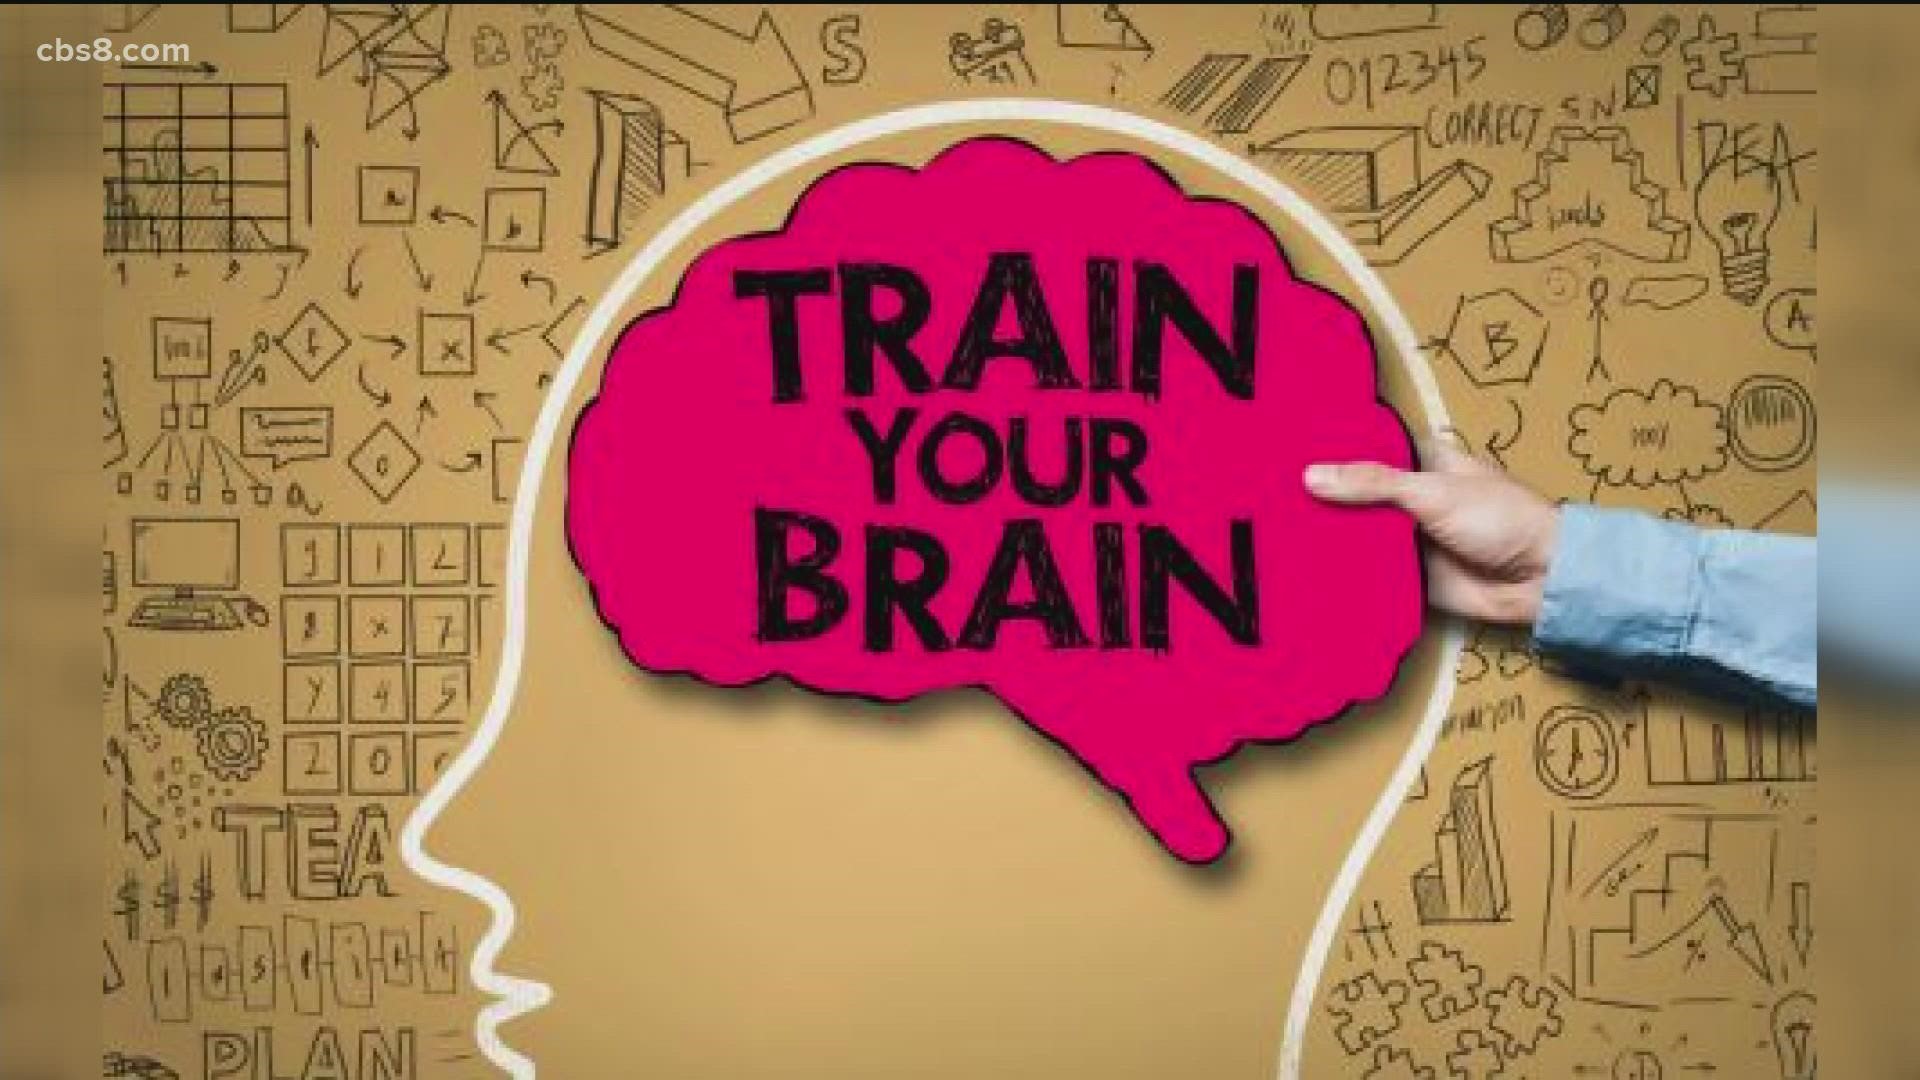 It's National Train Your Brain Day!